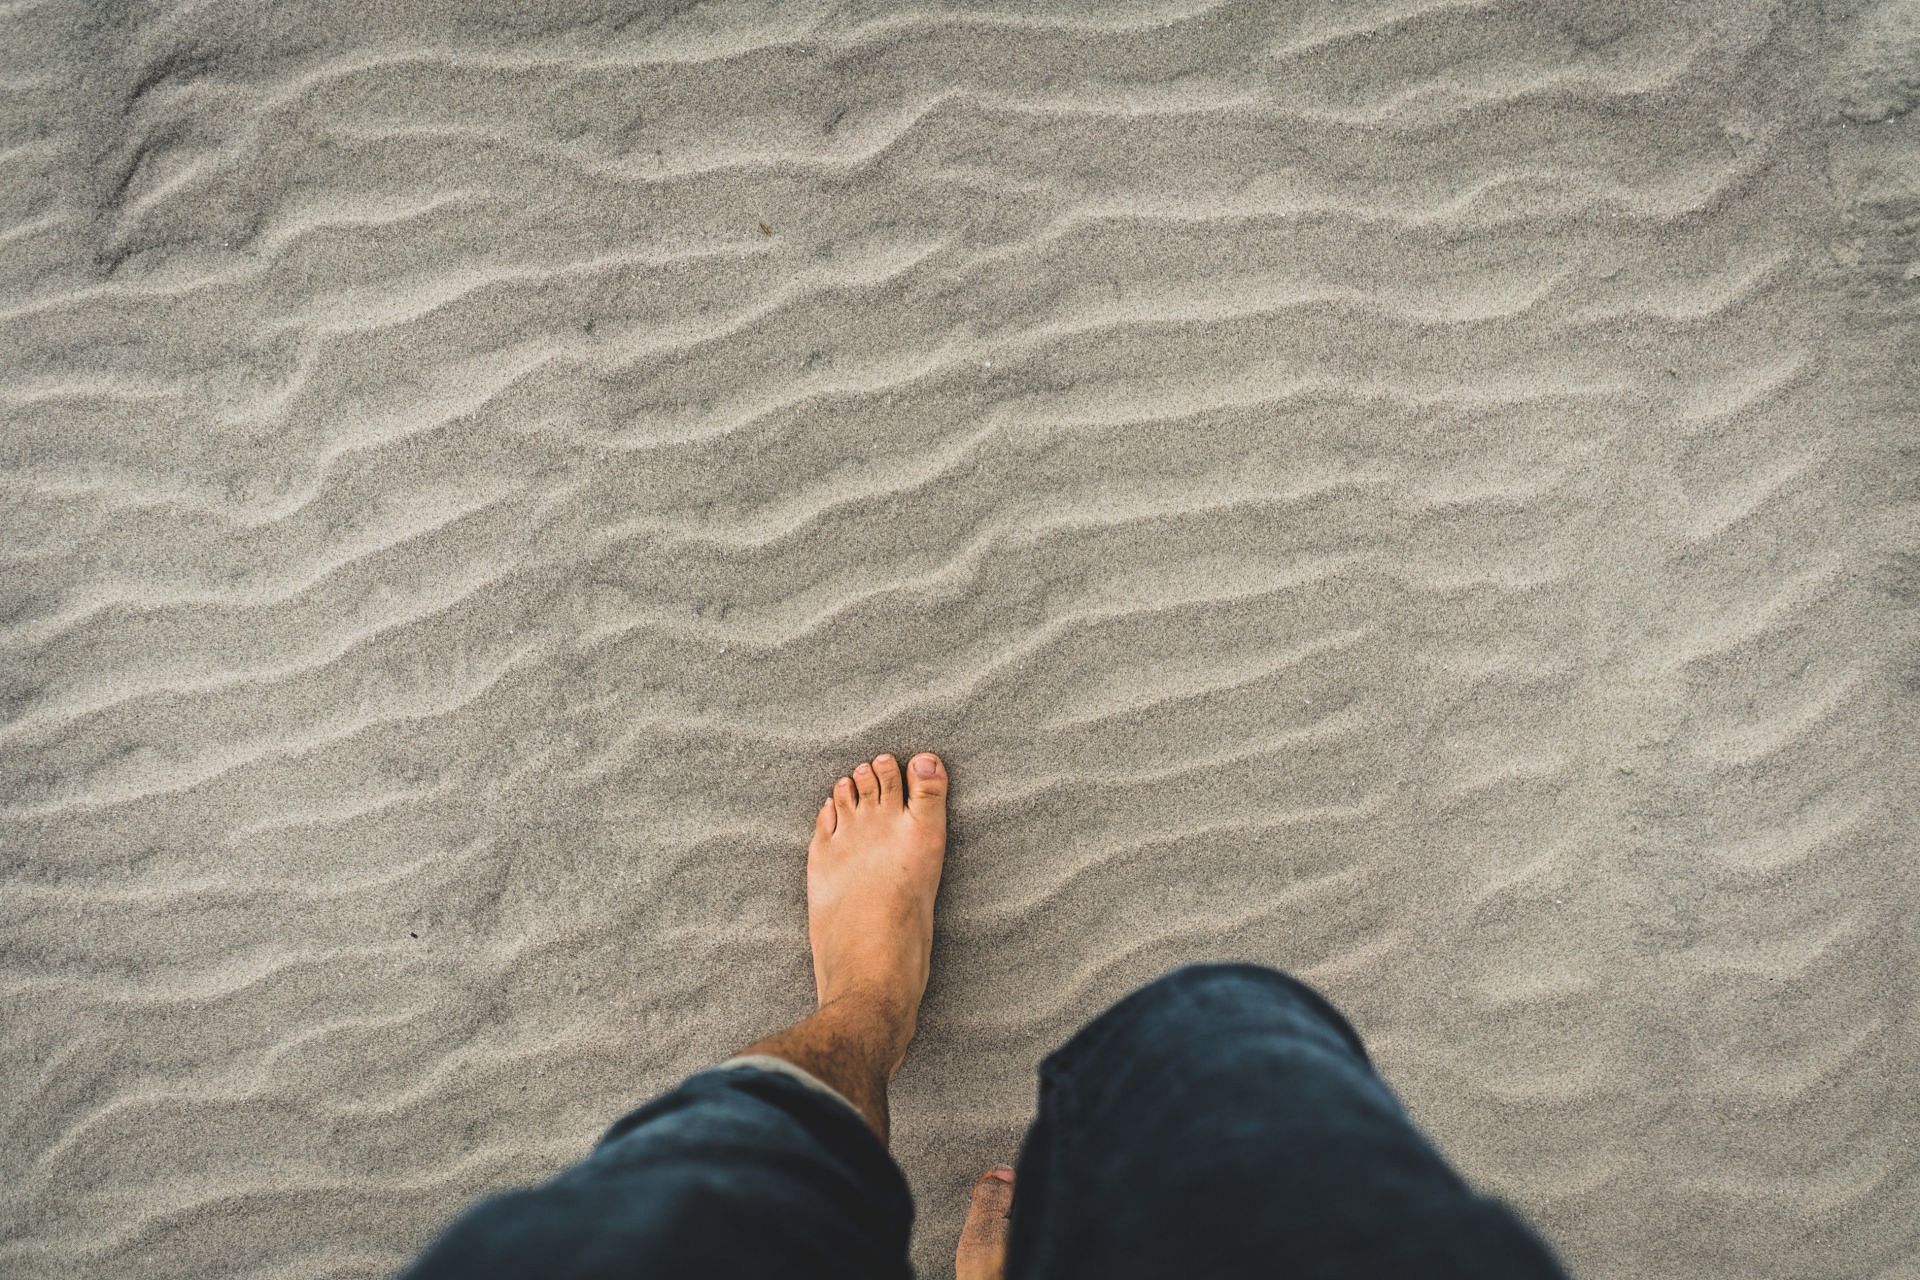 Grounding is an excellent way to connect to your inner self. (Image via Unsplash/Clint Mckoy)